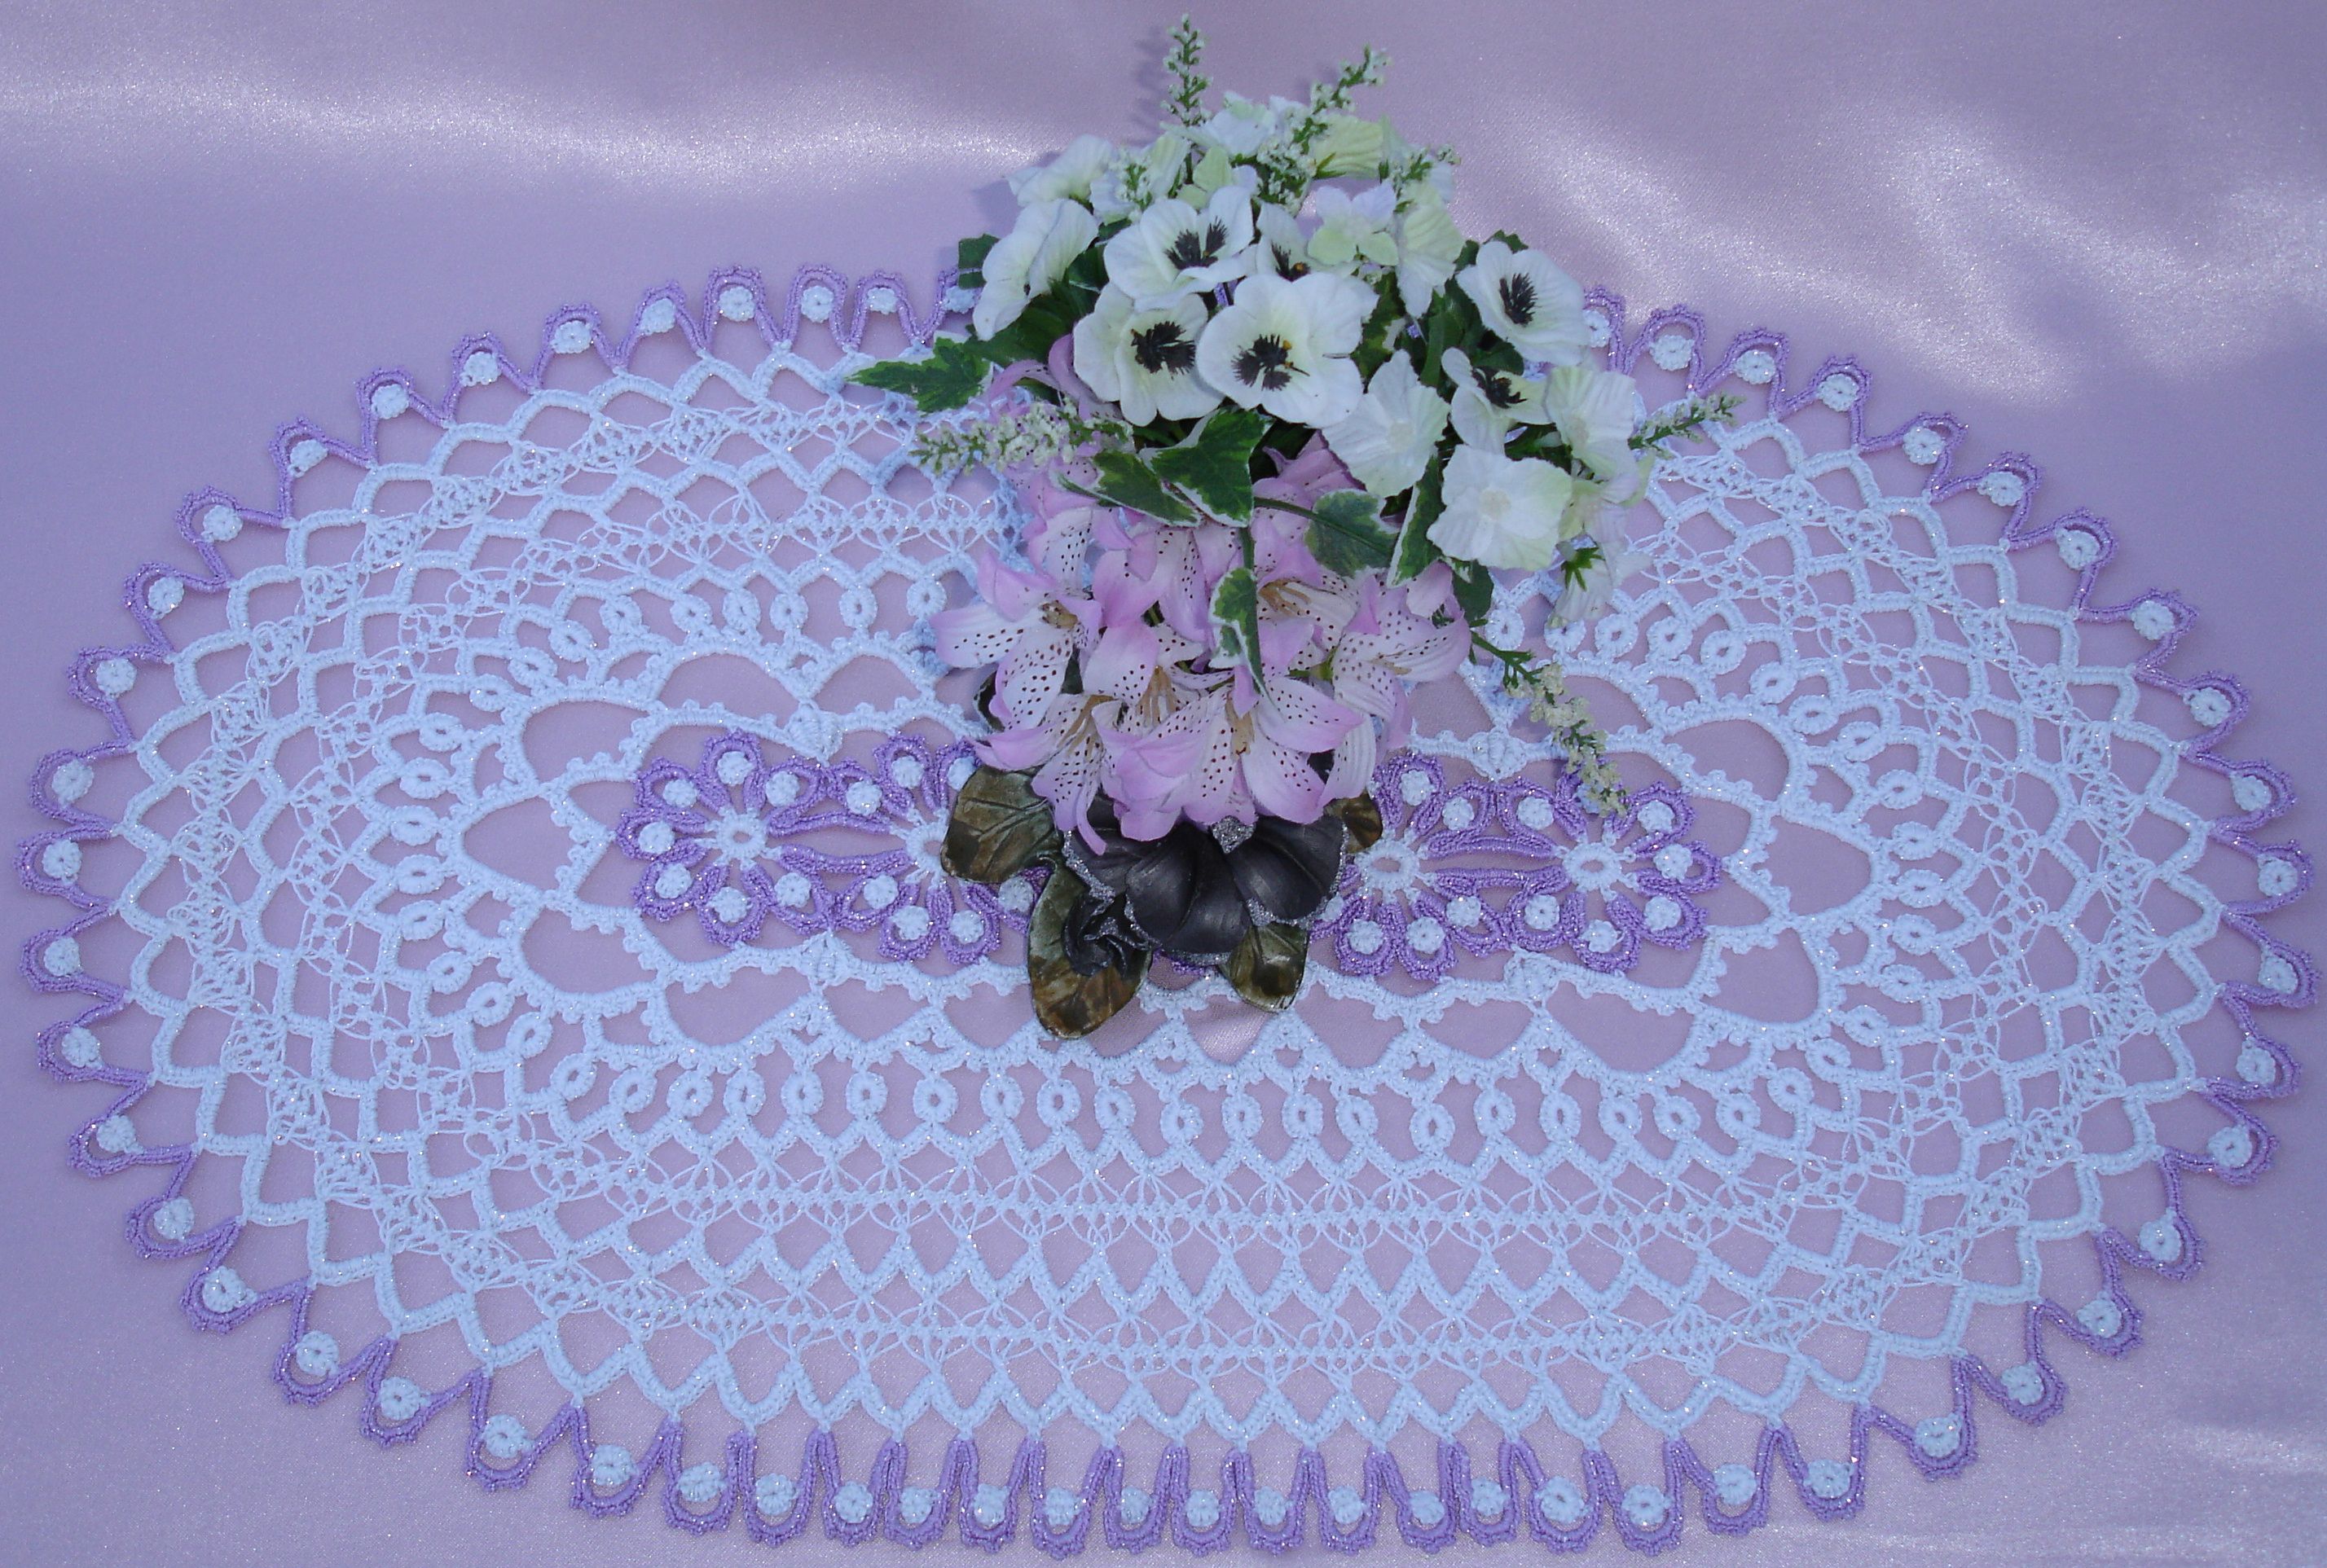 Hairpin Lace oval doily.JPG